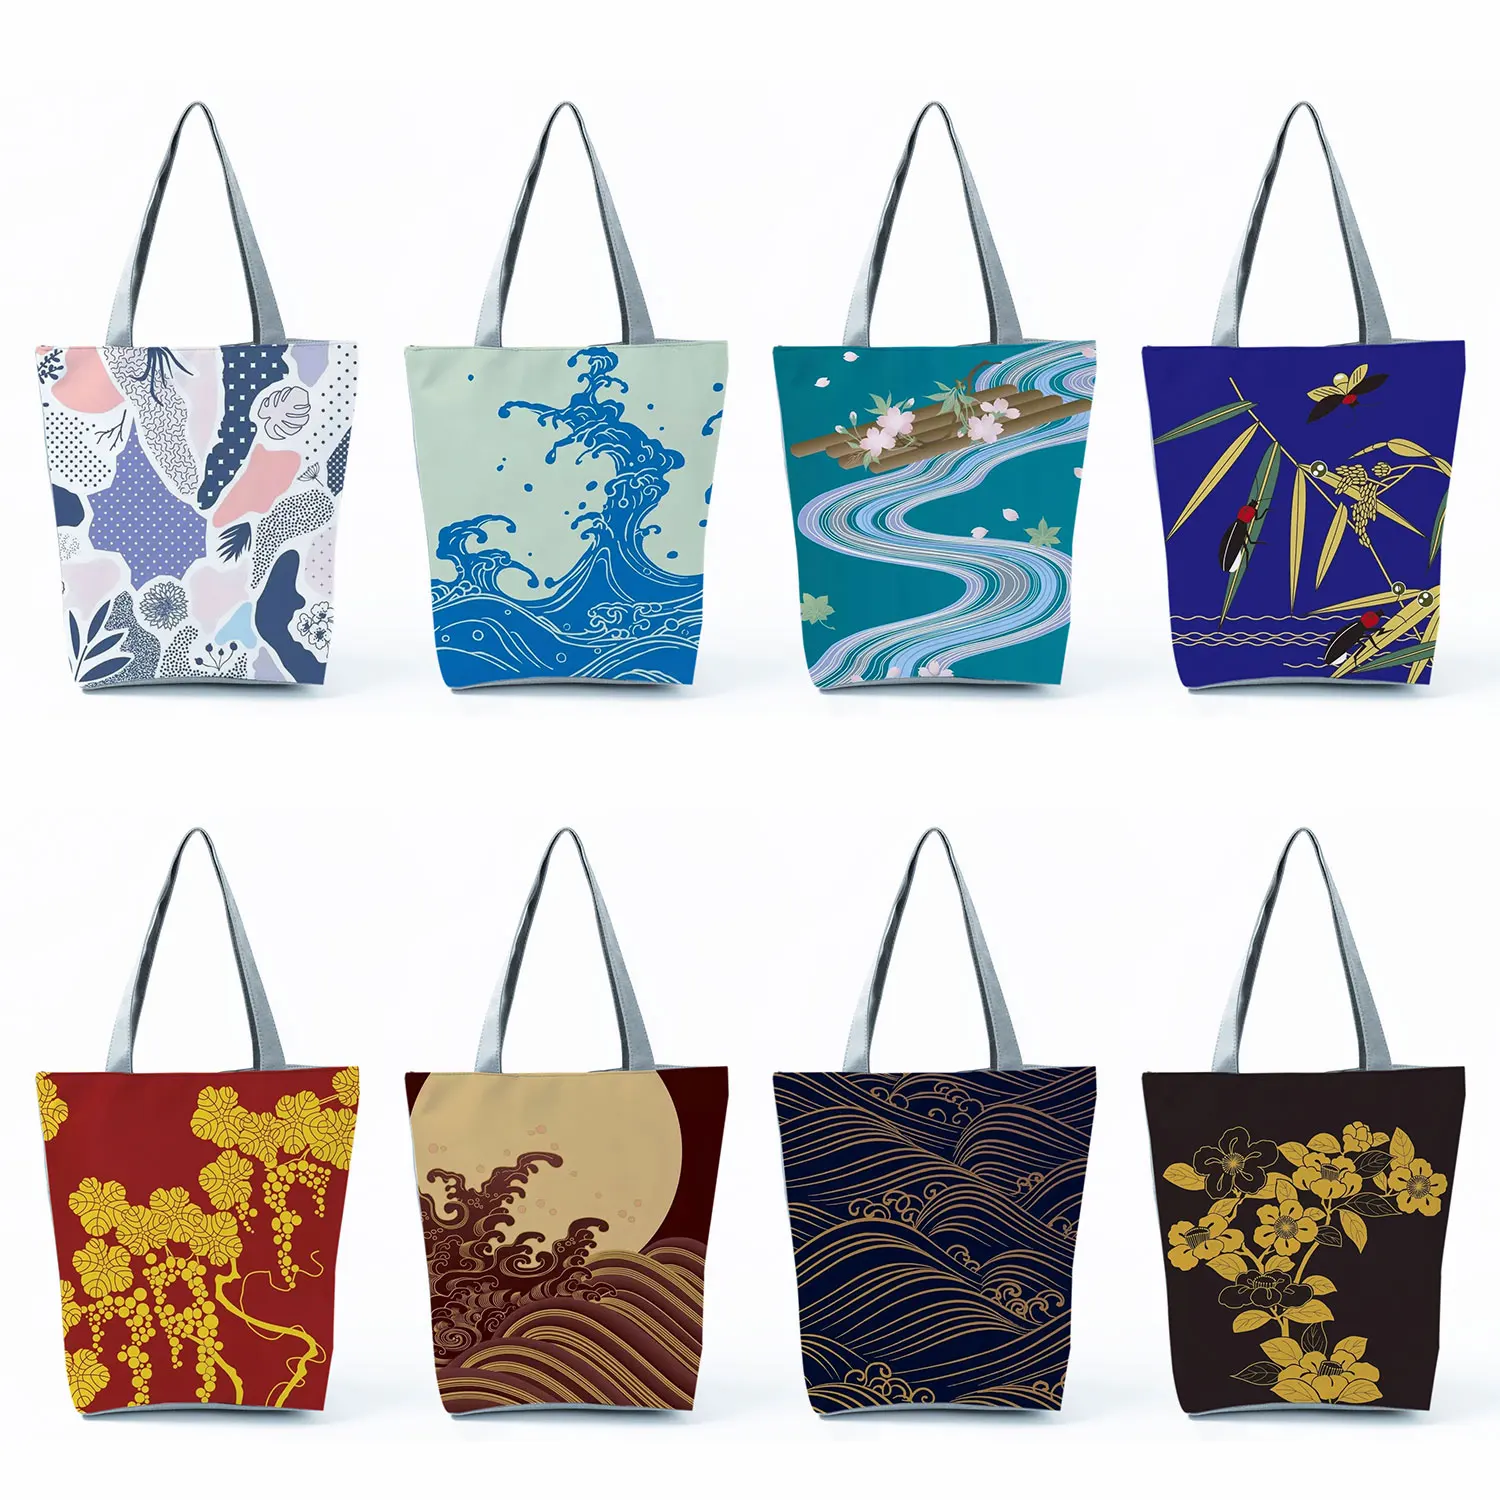 Japan Style Handbags For Women Casual Shopping Tote Bag Blue High Capacity Travel Beach Package Floral Print Shoulder Bag Female